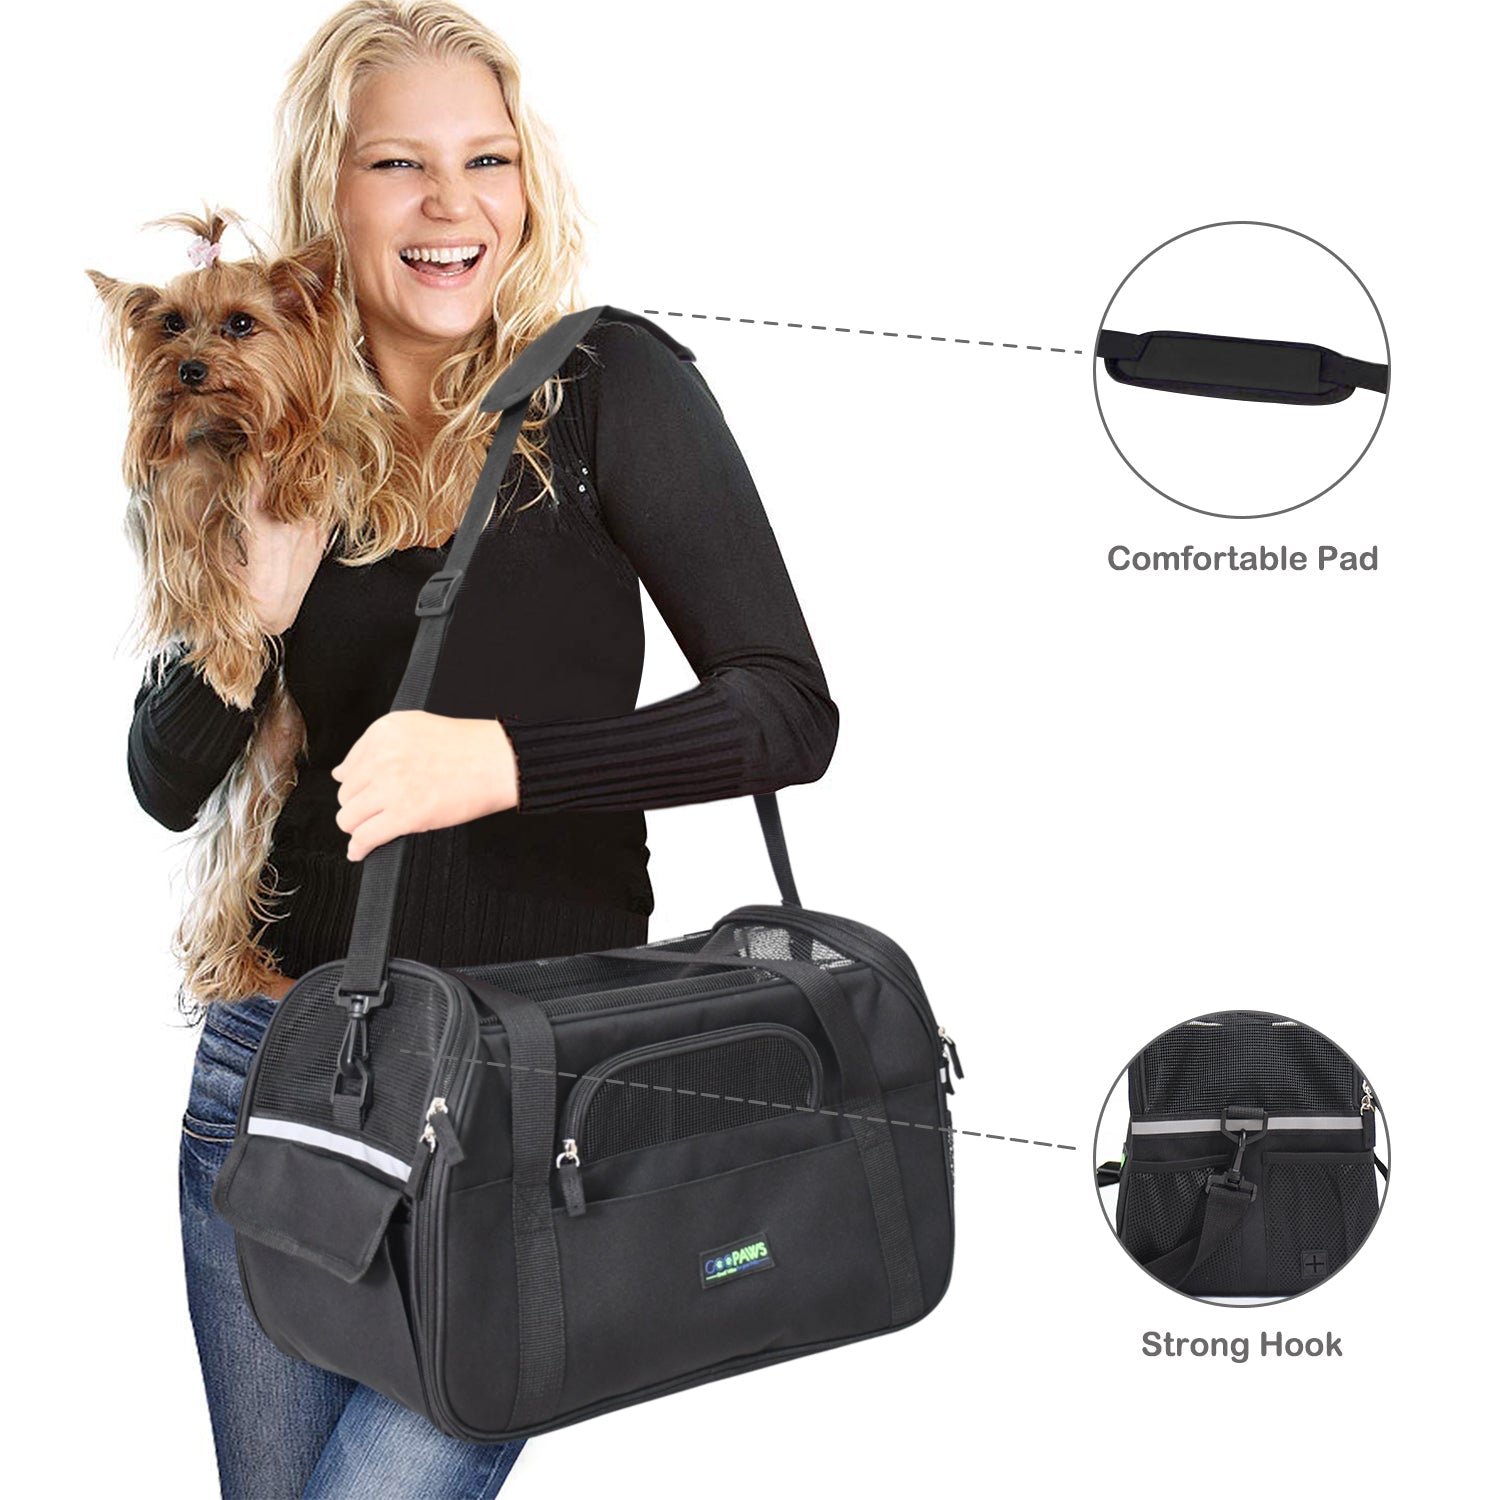 GOOPAWS Soft Sided Small Dog Carrier Comfort for Travel, Black, 19"